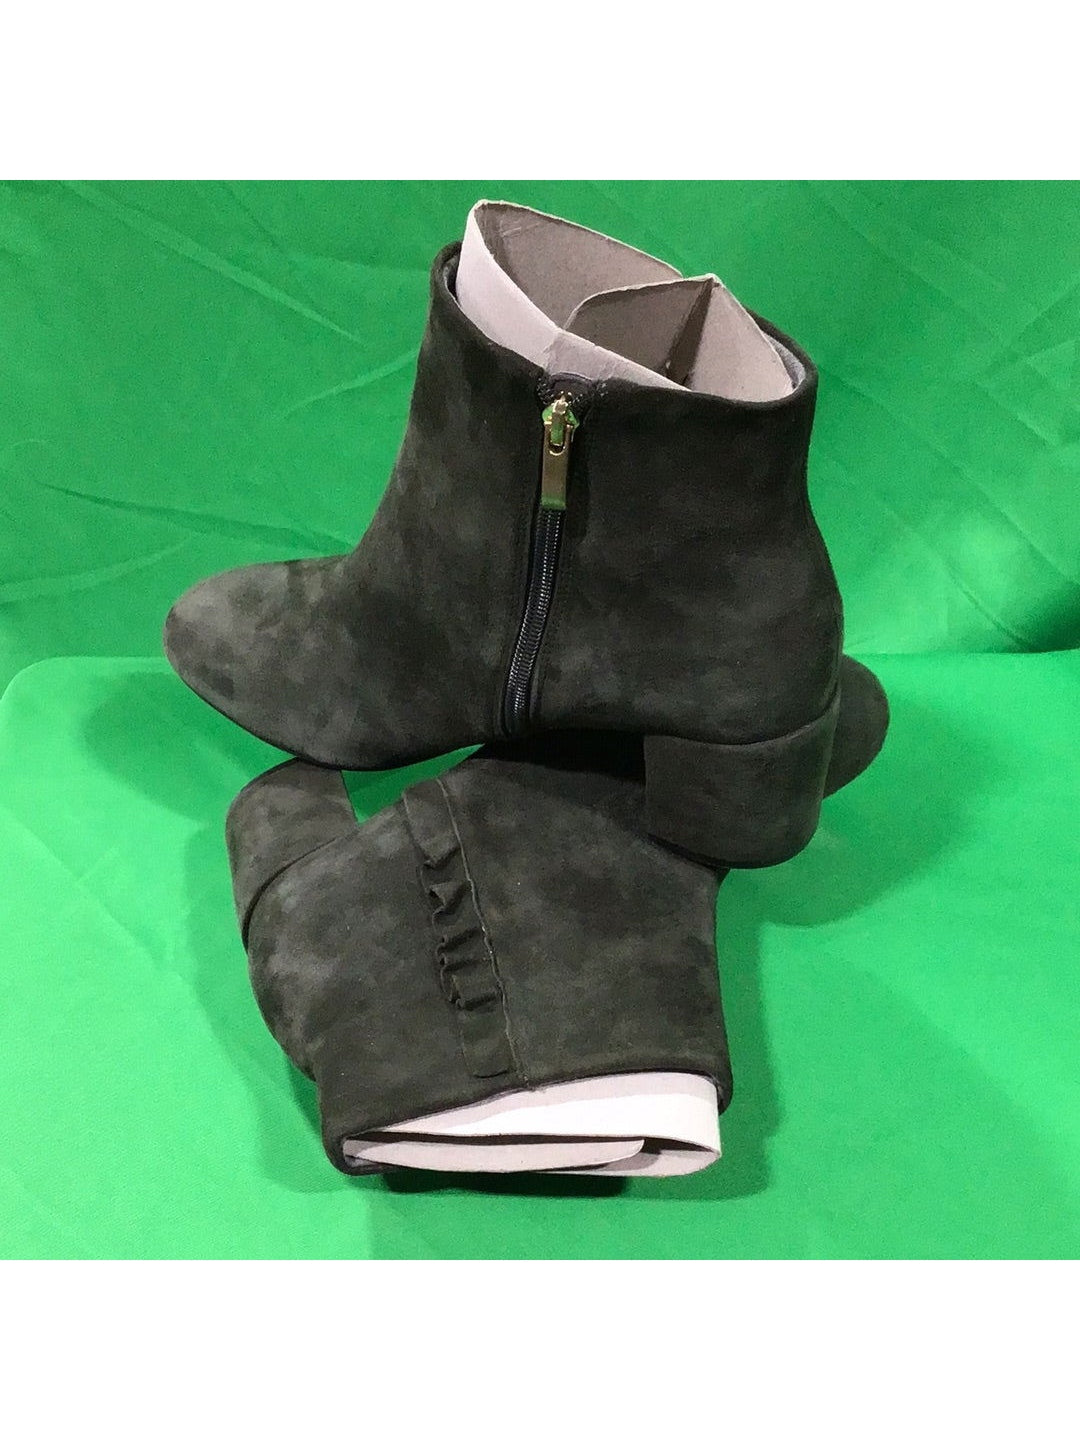 Rockport Ladies 9M Olive Green Leather Mid Boots in Box - The Kennedy Collective Thrift - 